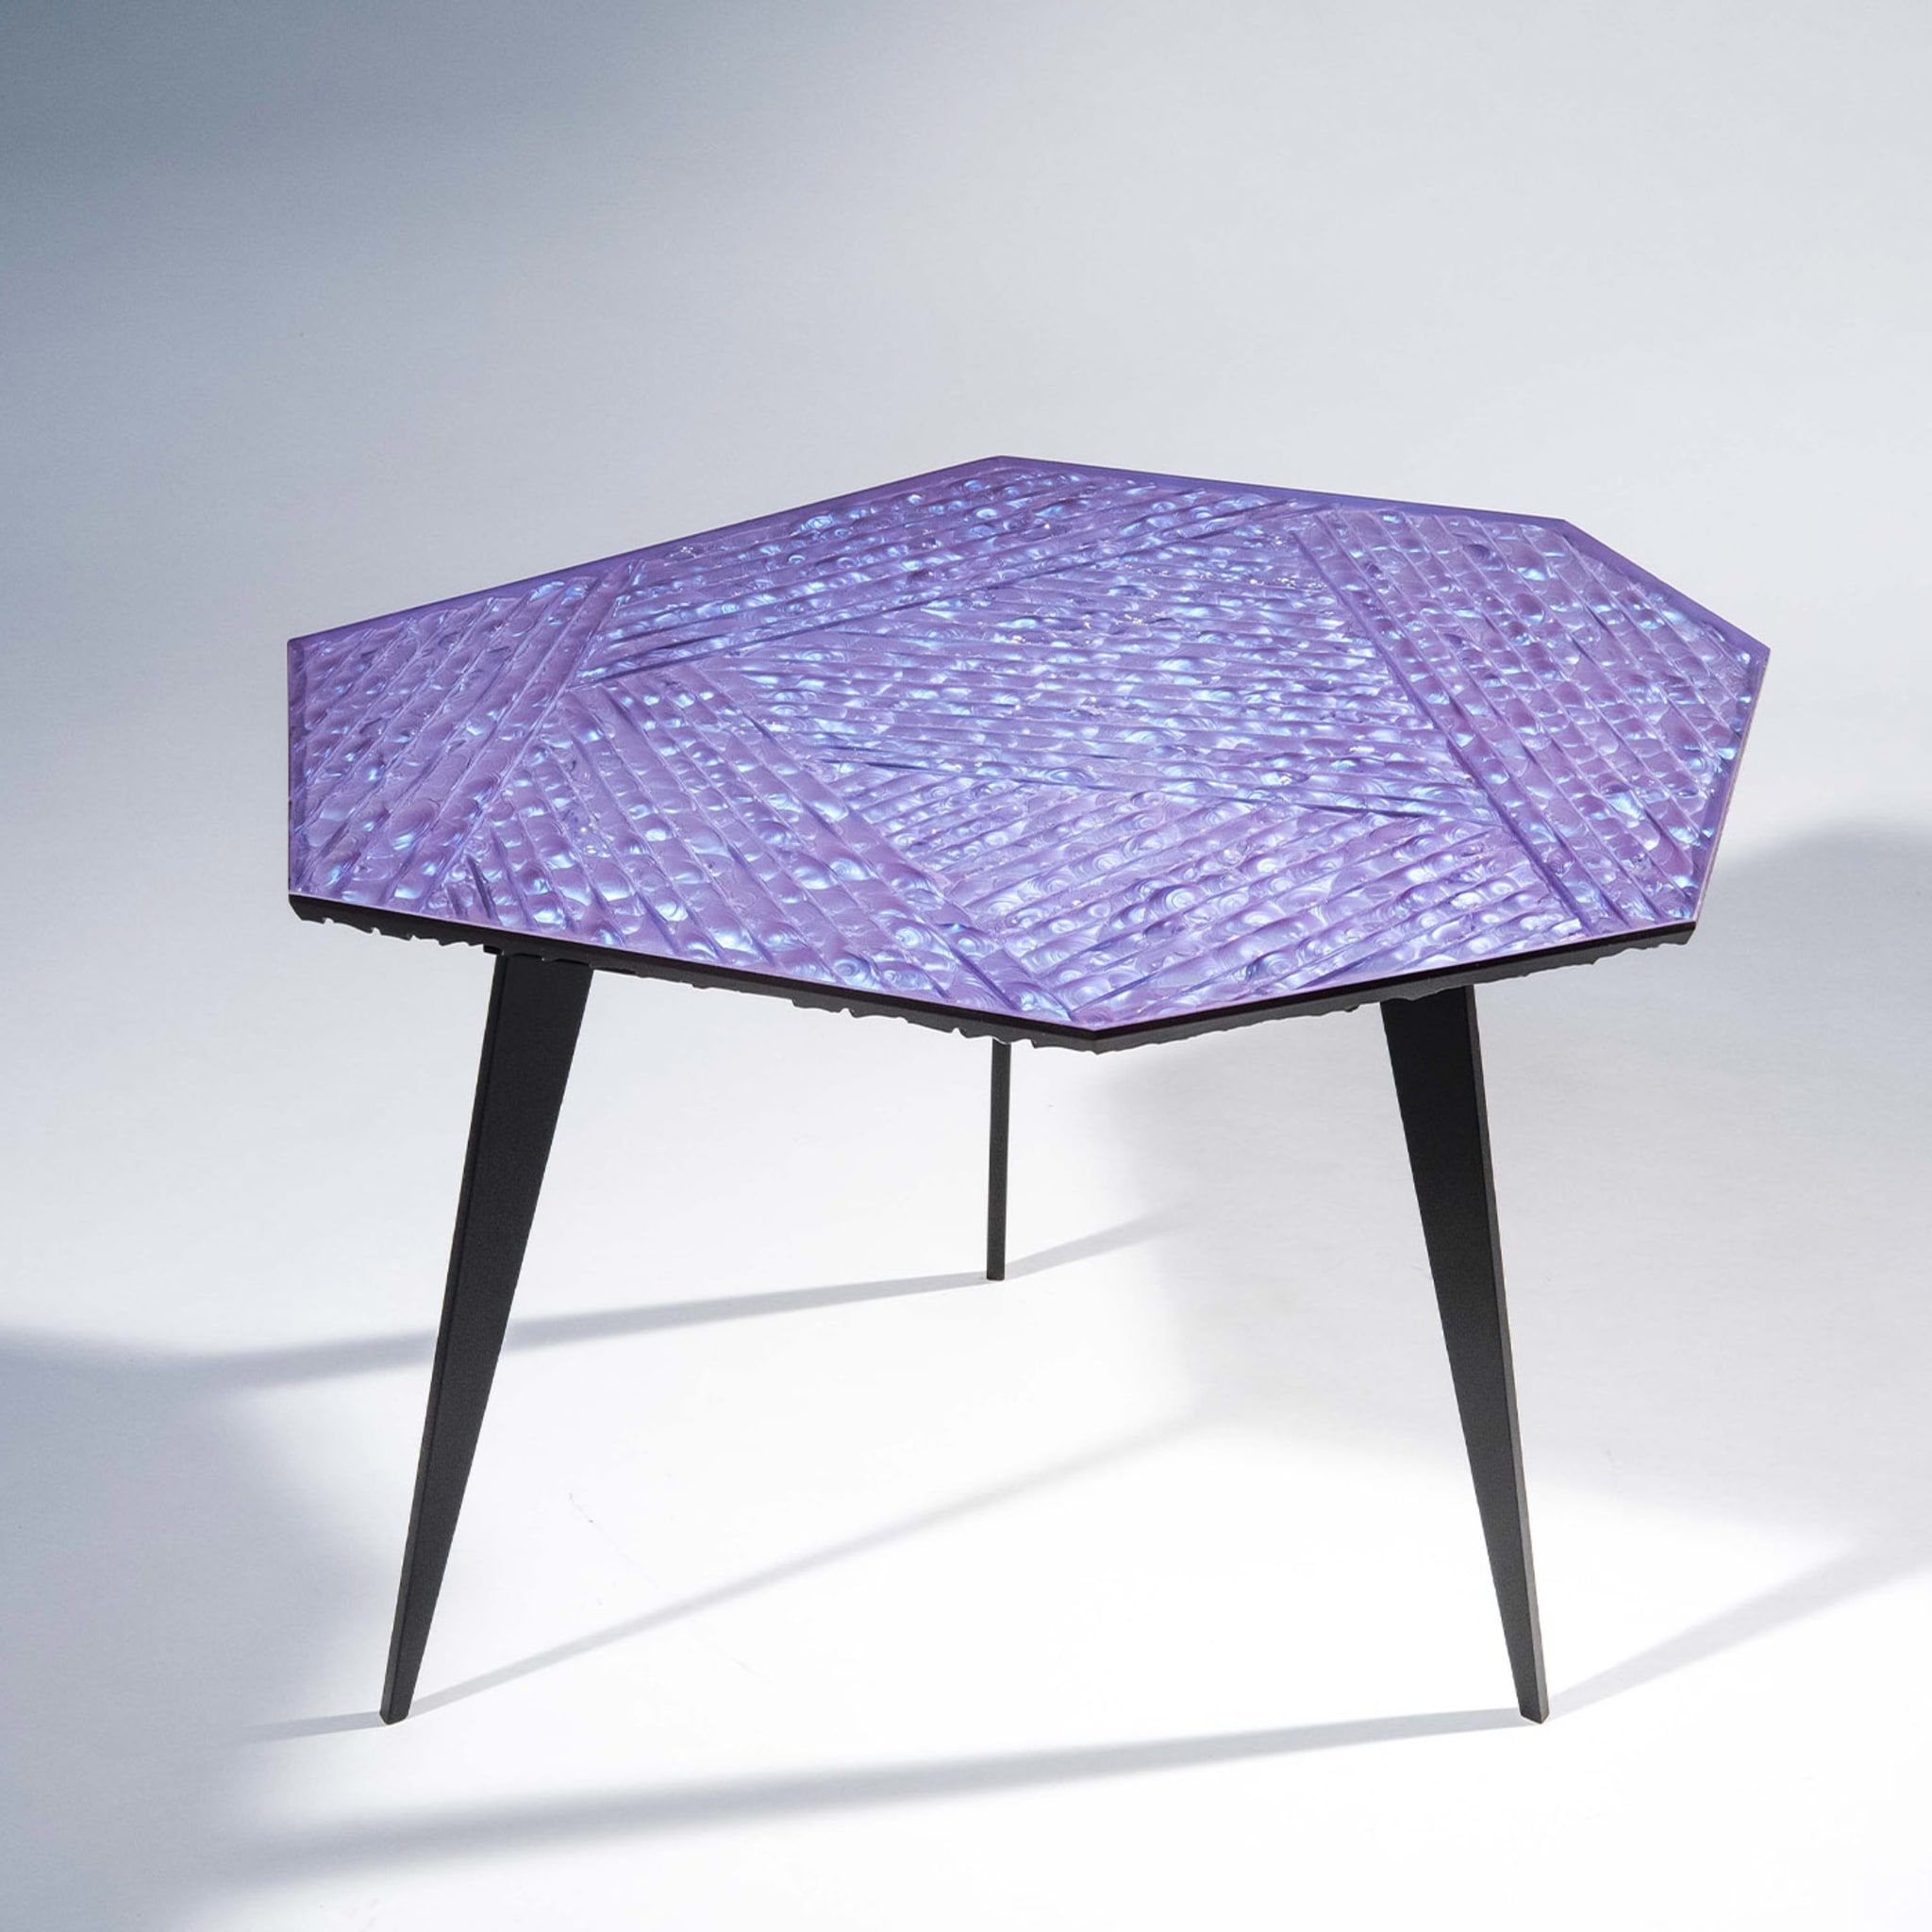 Velluto Iridescent Crystal Coffee Table - Alternative view 5